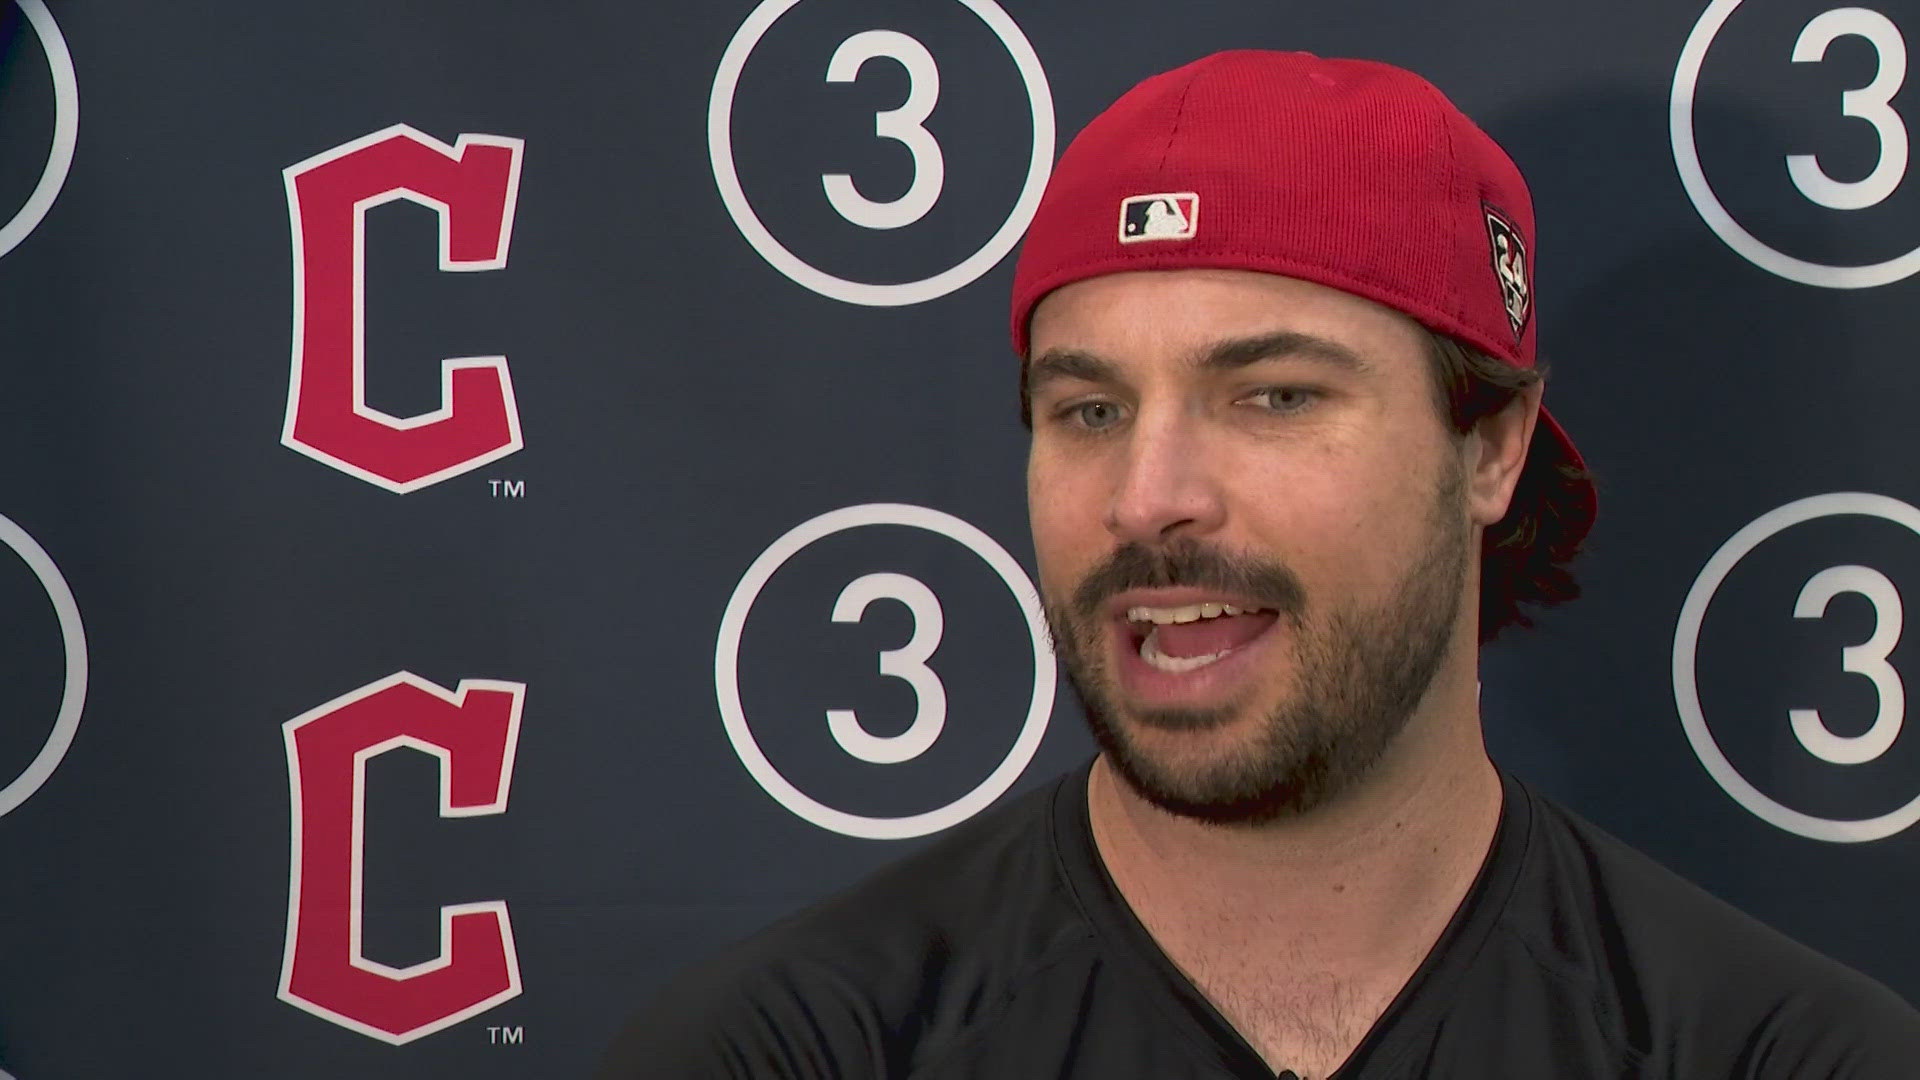 We're getting to know more about Cleveland Guardians catcher Austin Hedges in this edition of Beyond the Dugout with 3News' Jay Crawford.